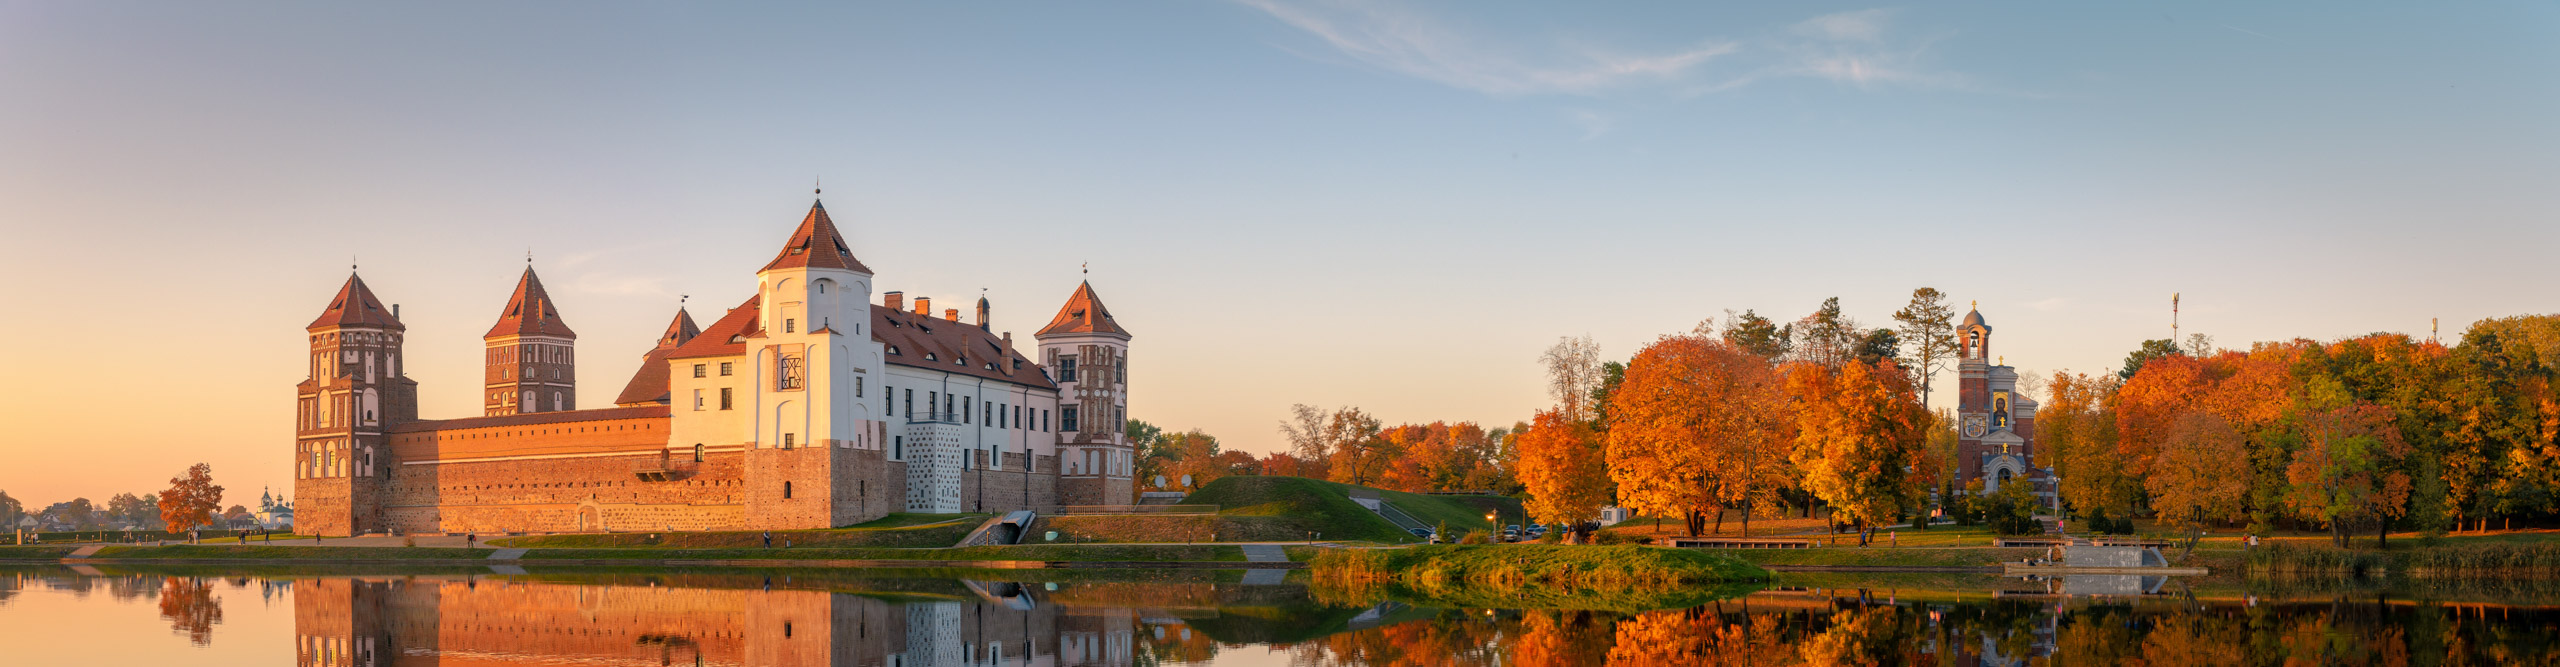 Mir castle in the warm glow of the setting sun, reflected in the water at Belarus